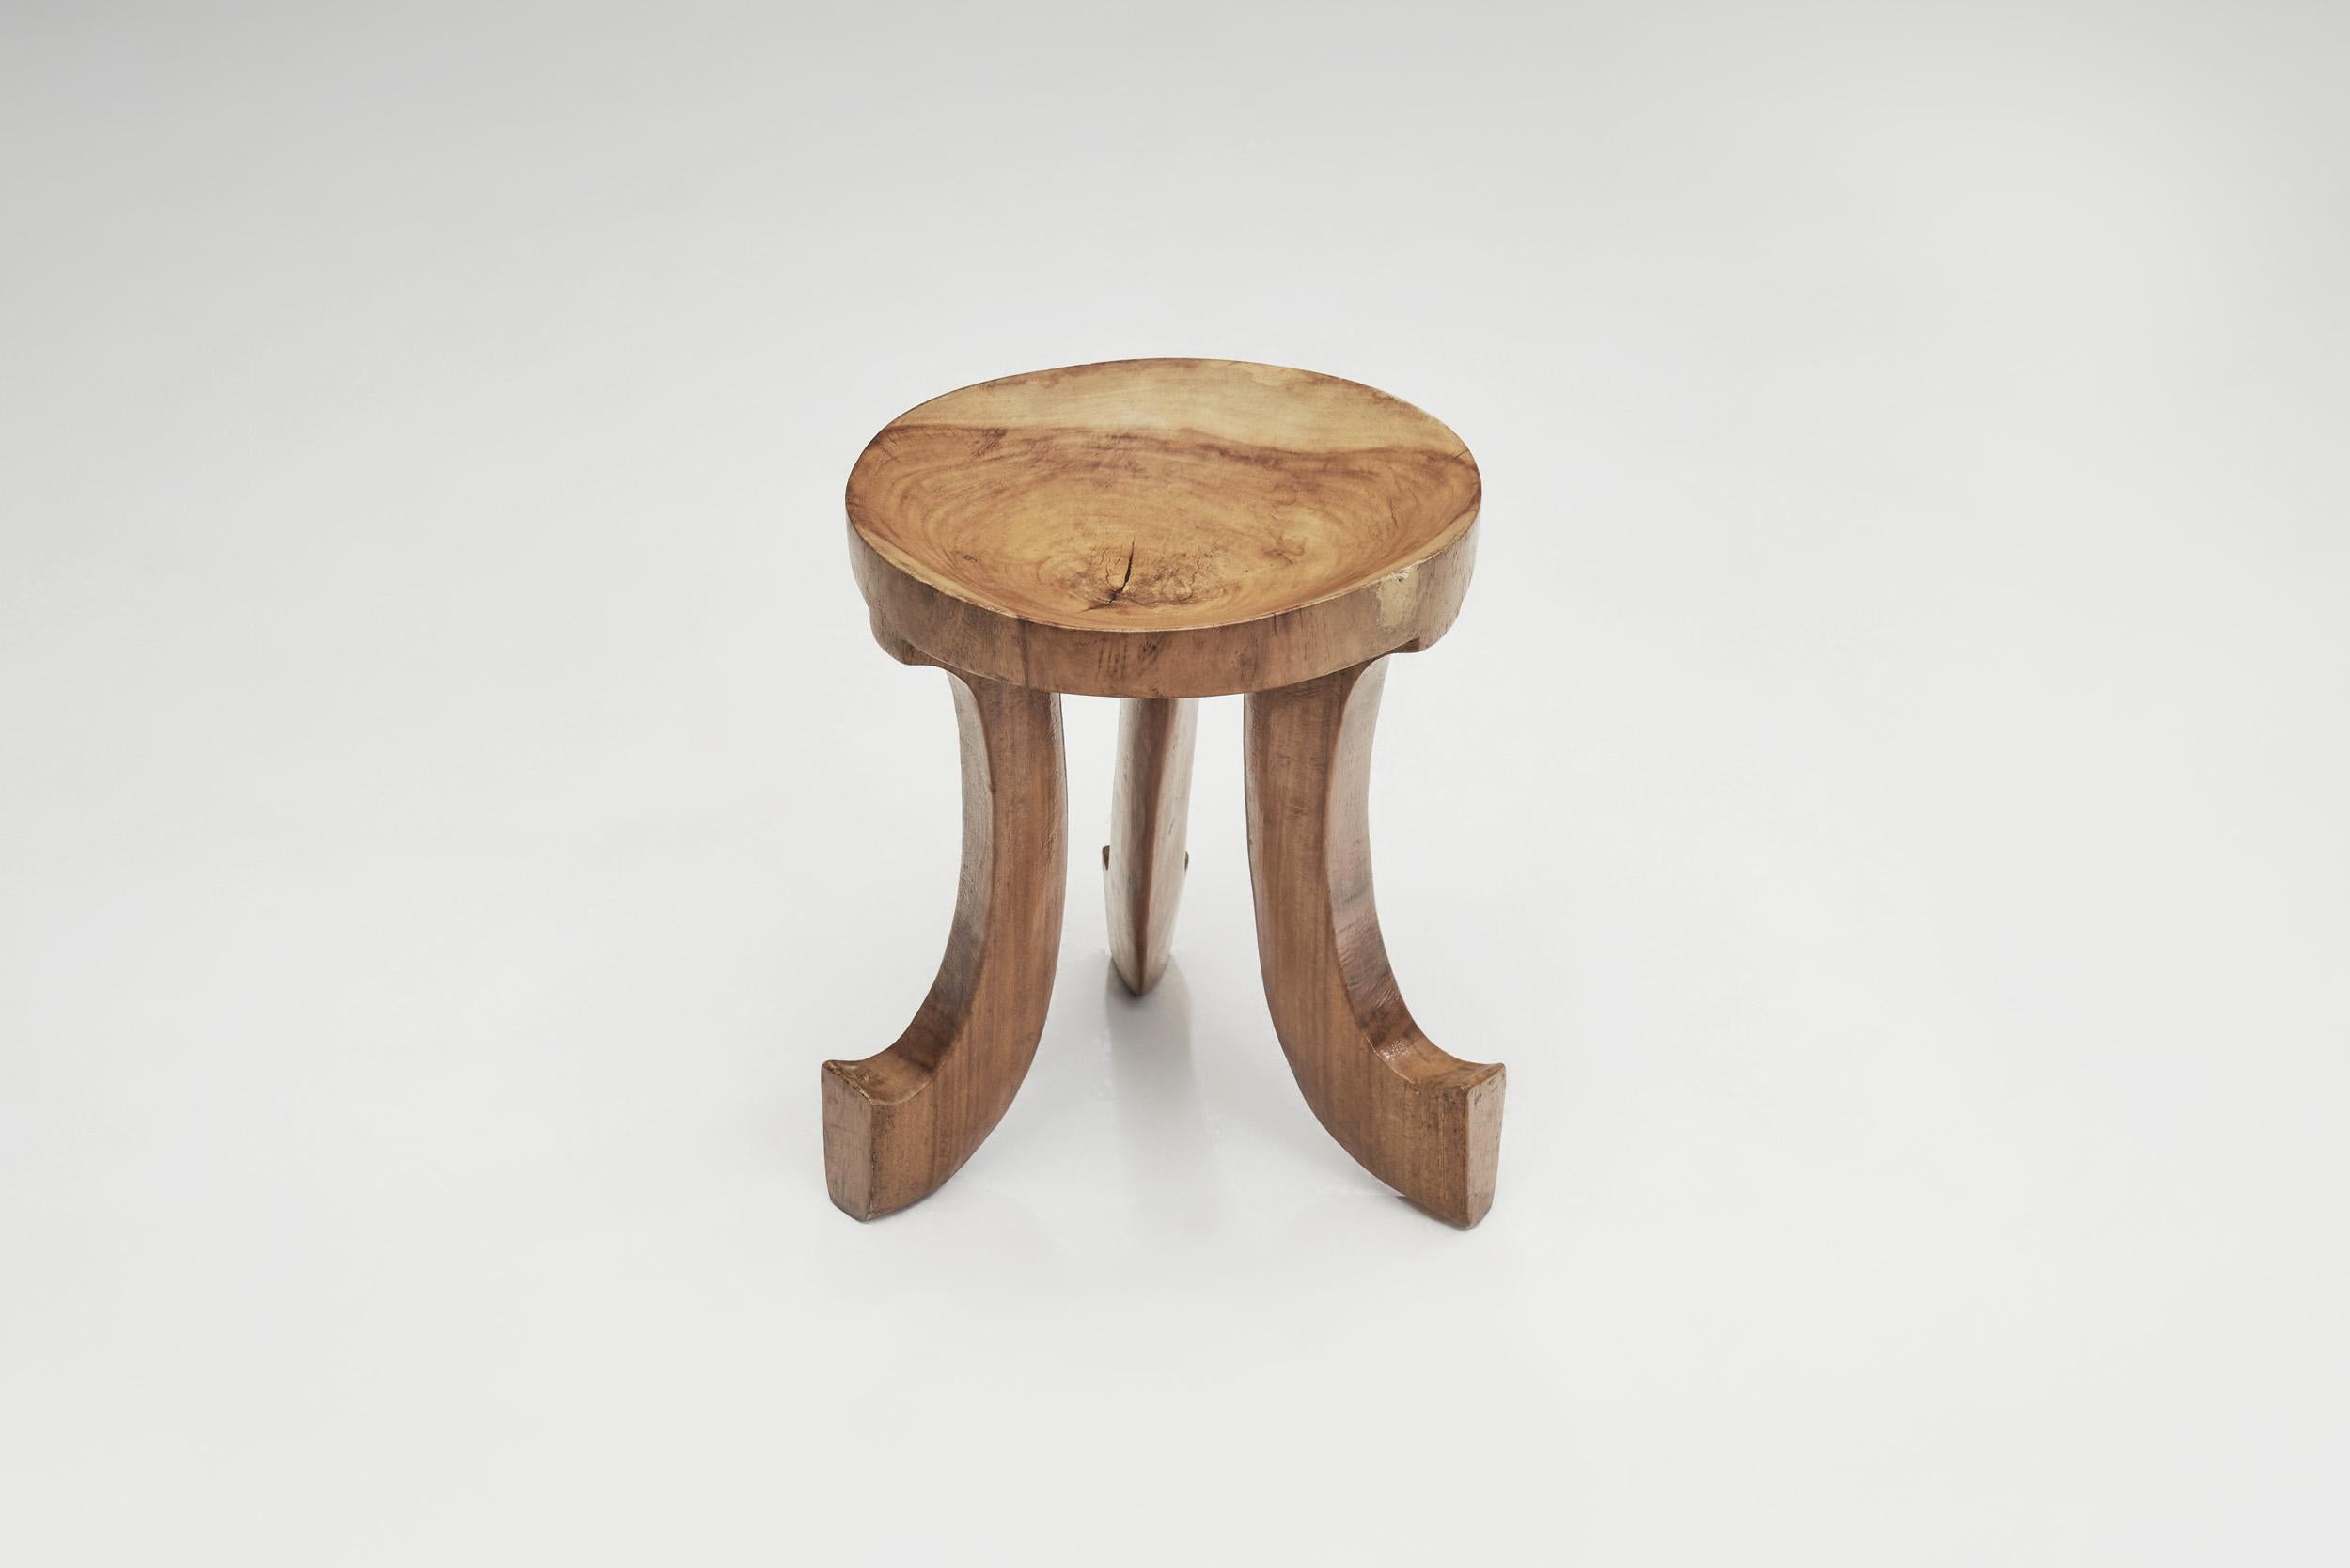 Wood Ethiopian-Style Stool with Scrolled Legs, Norway, First Half of the 20th Century